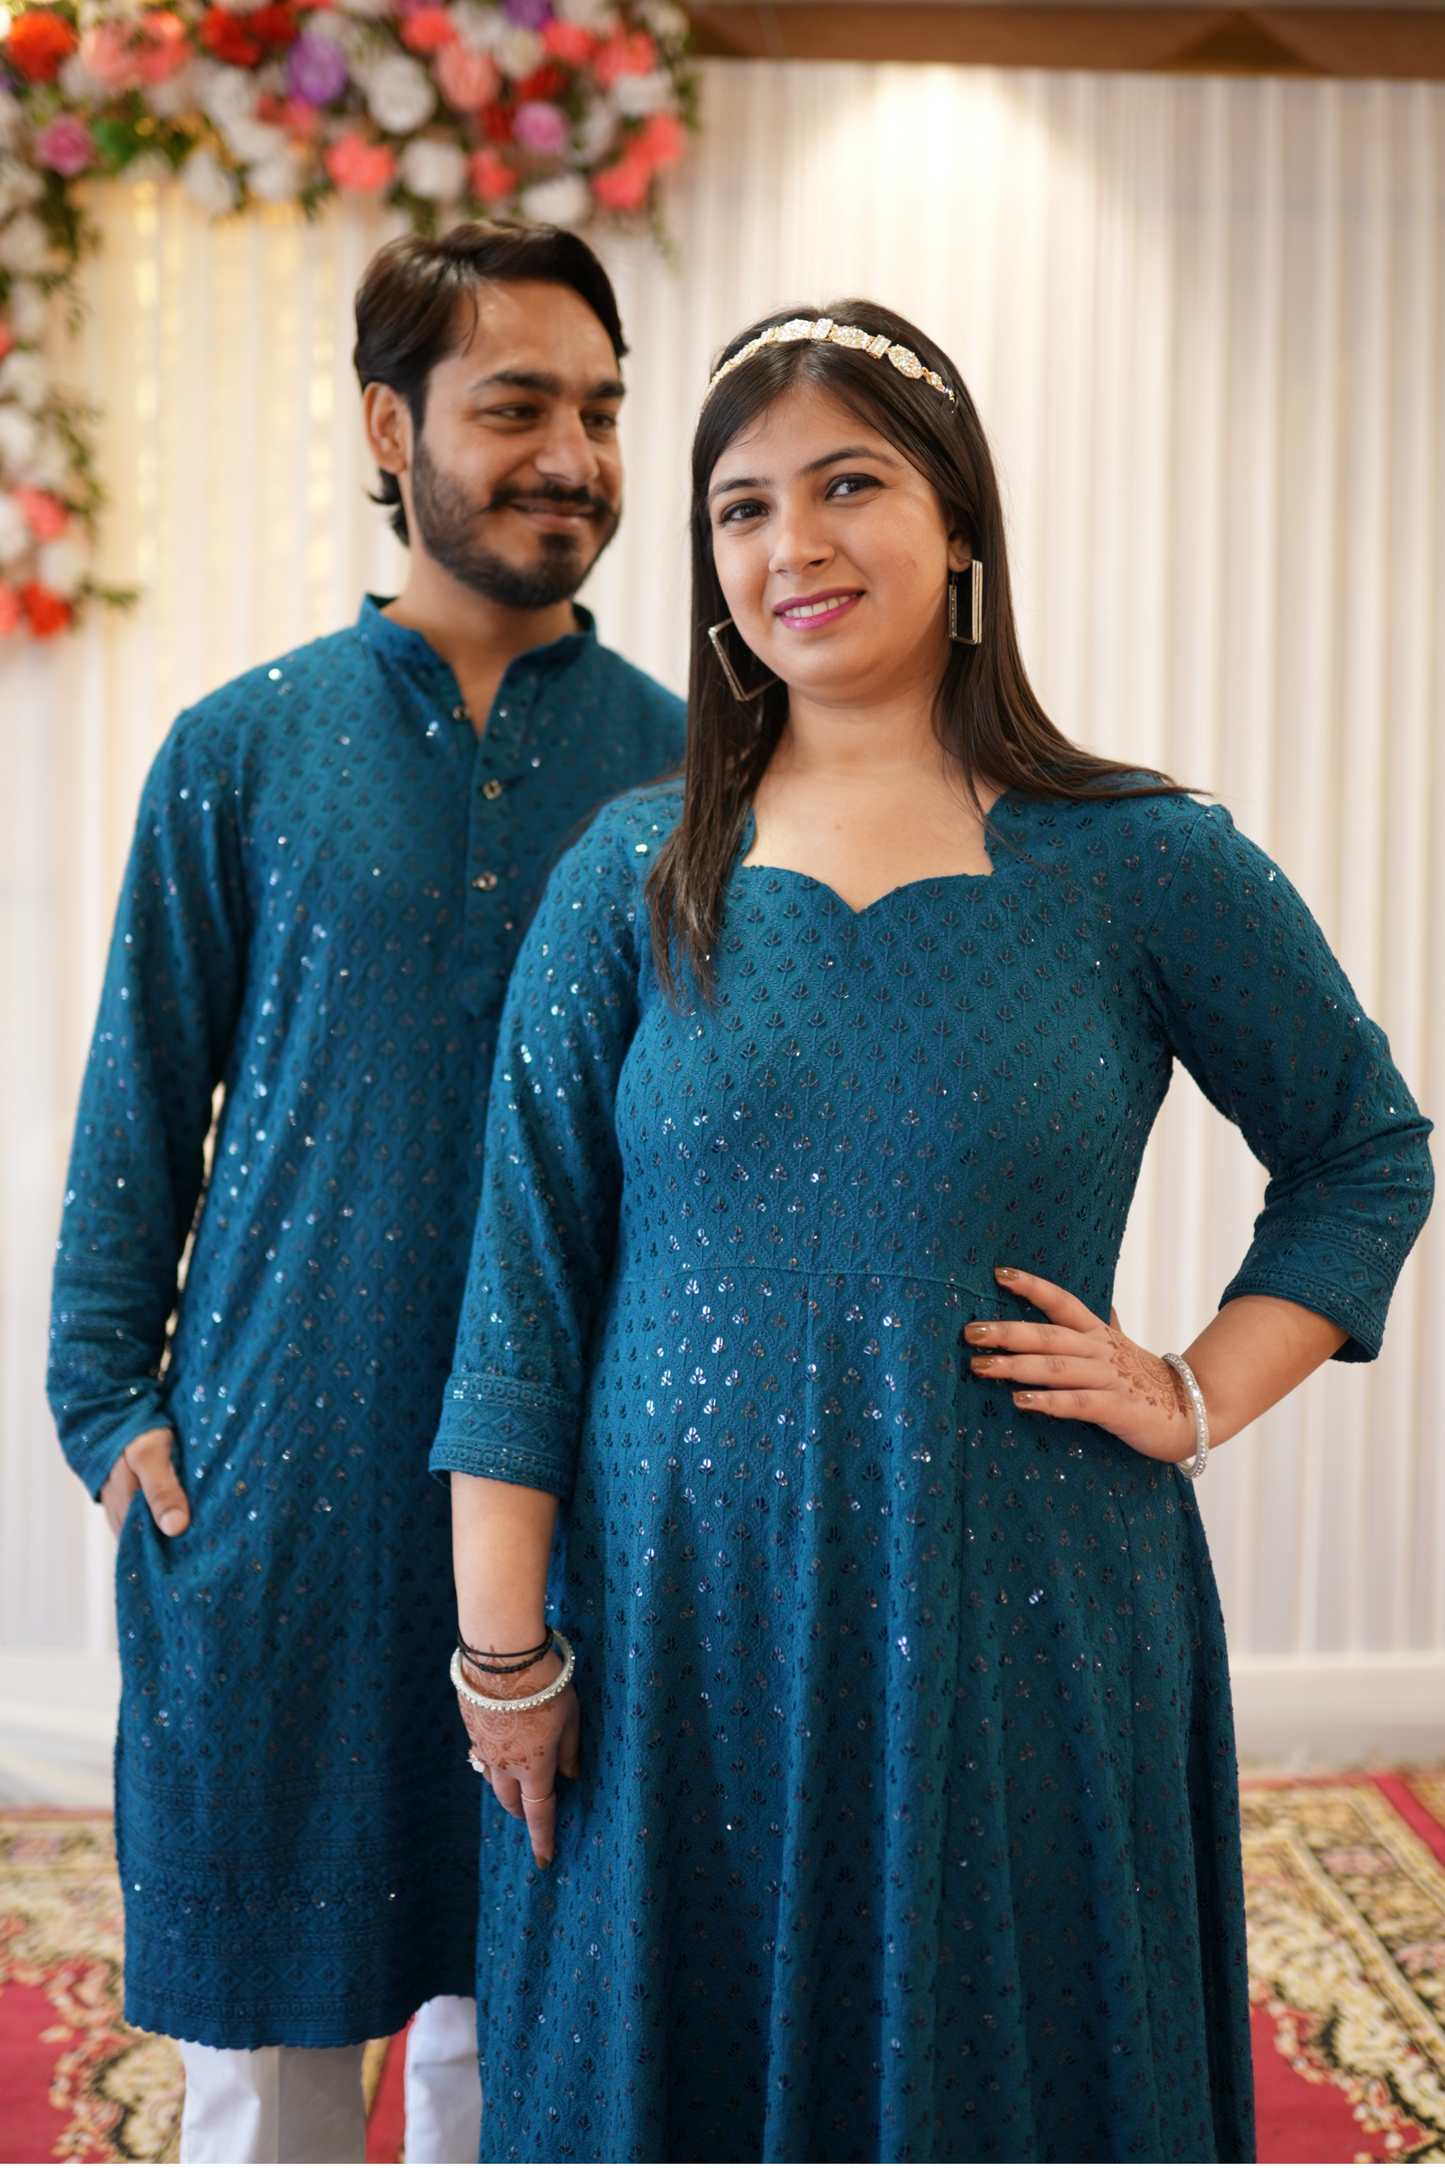 Peacock Blue Sequined Couple Dress